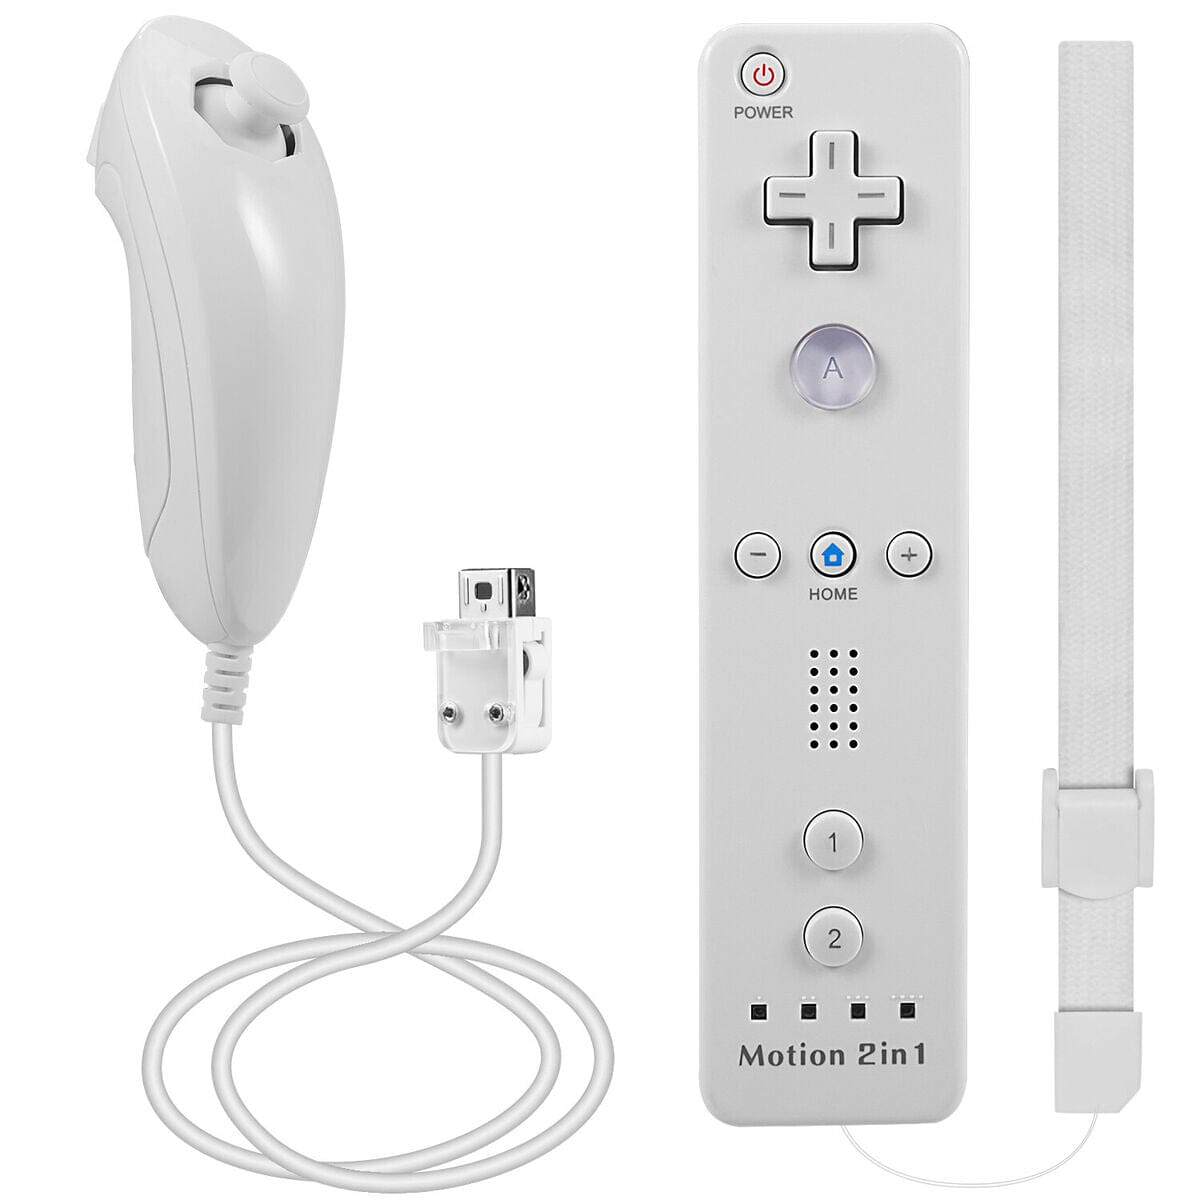 2 in 1 Motion Plus Remote and Nunchuck Controllers Video Game Console Accessories Retro Games 